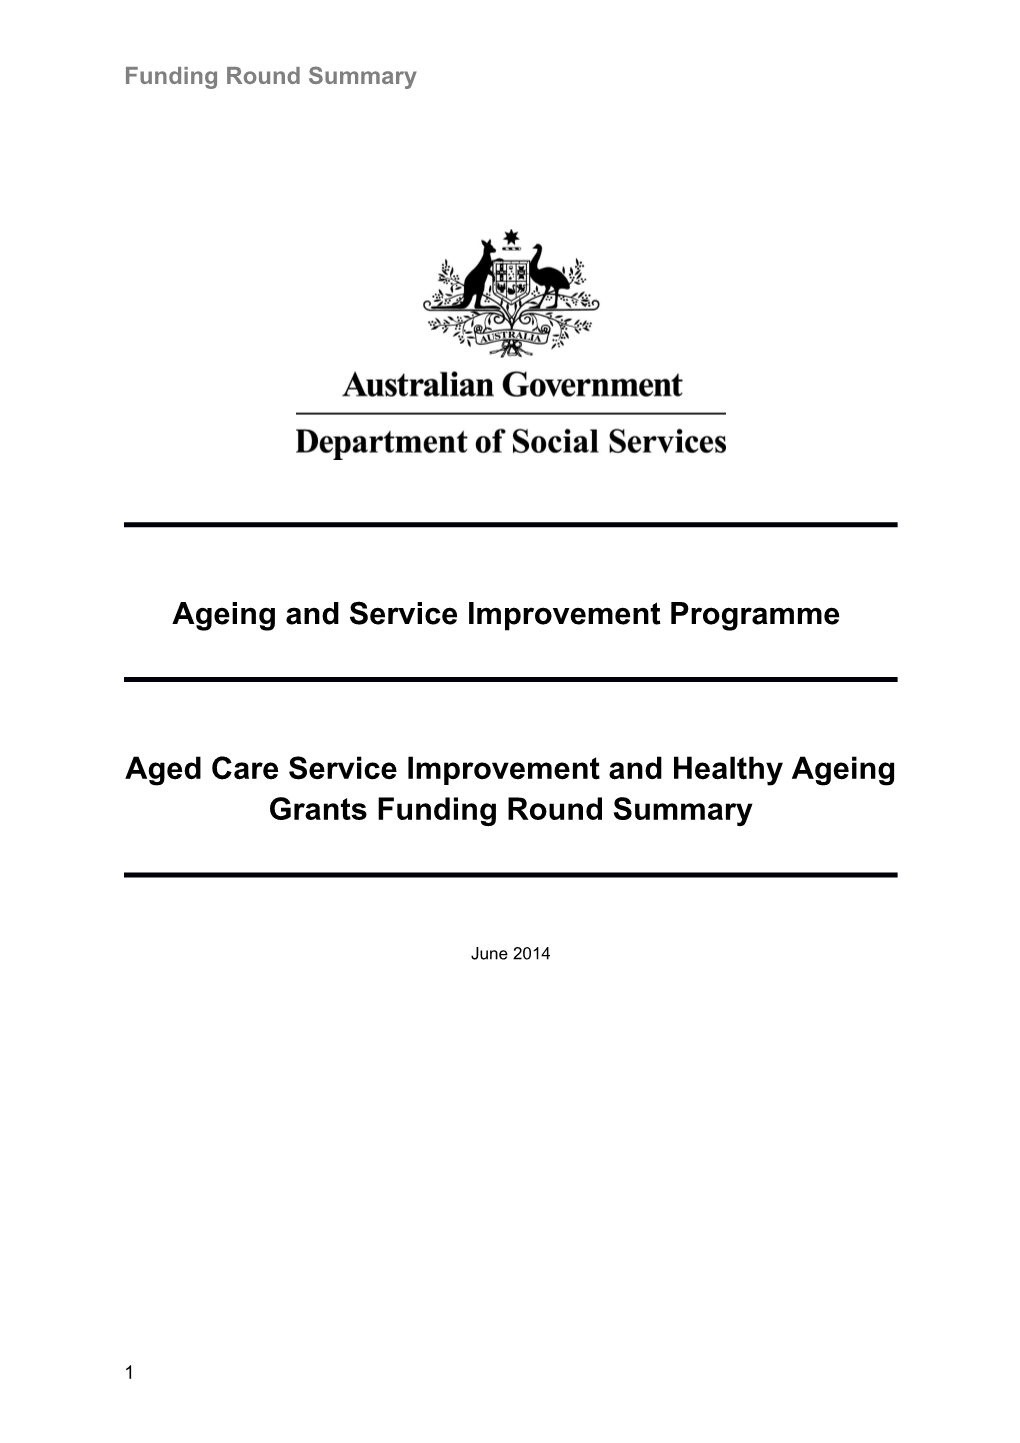 Ageing and Service Improvement Programme